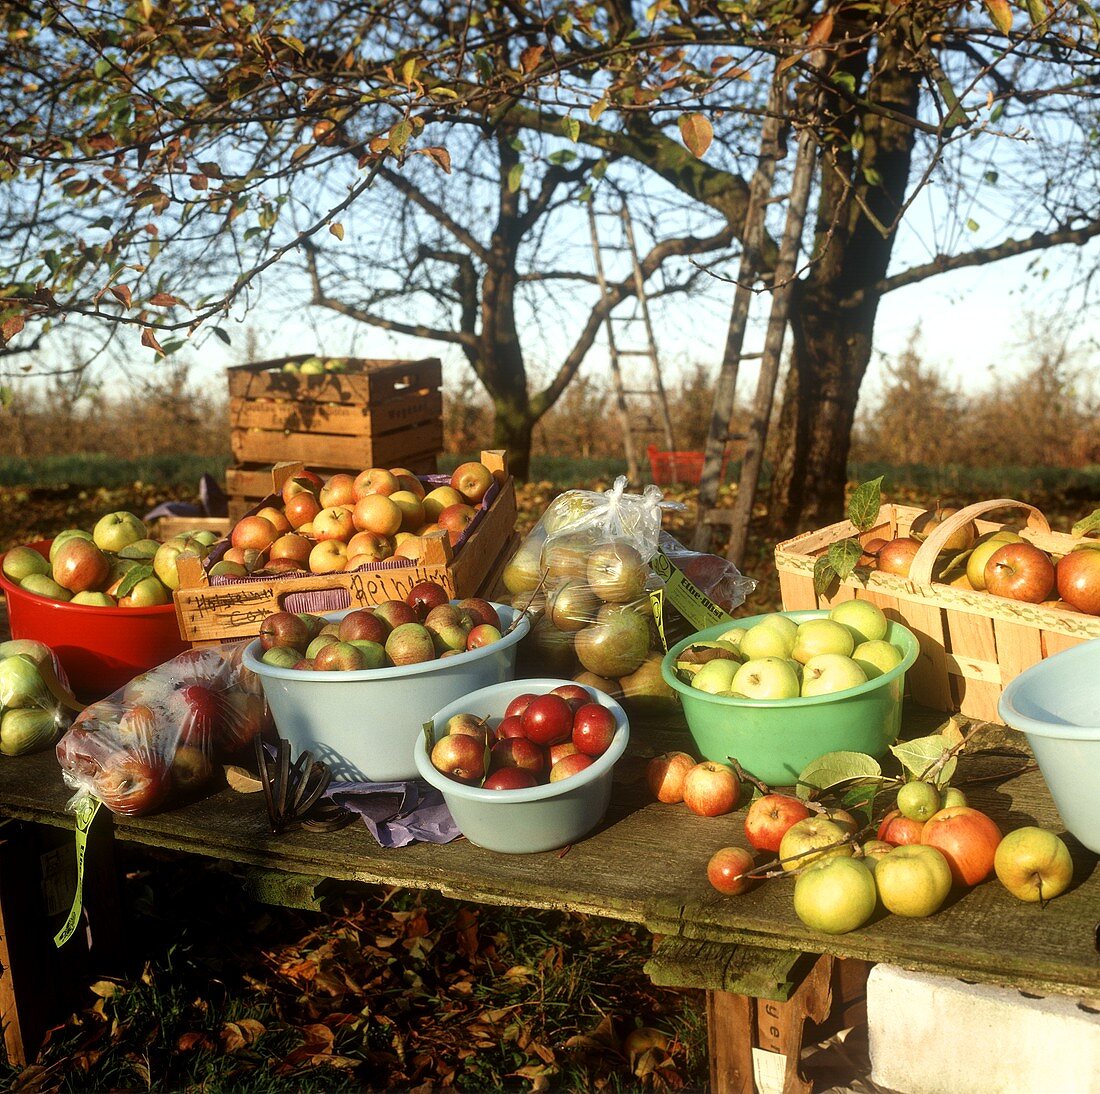 Apple harvest: several types of apple in baskets and bowls